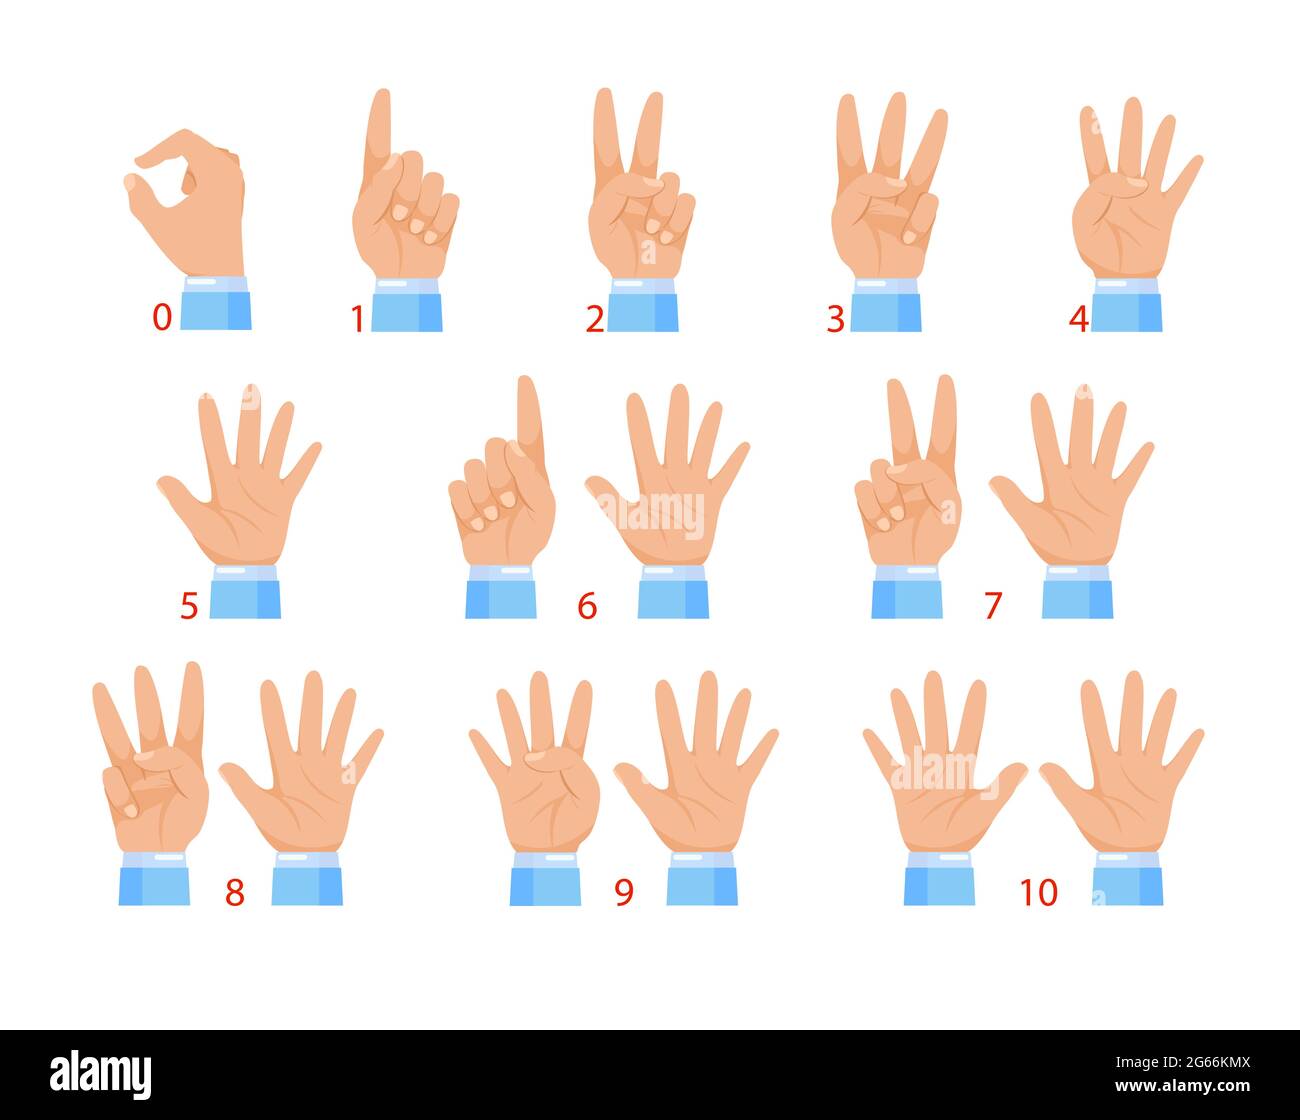 Vector illustration of hands and numbers by fingers. Human hand and number gesture isolated on white background. Stock Vector